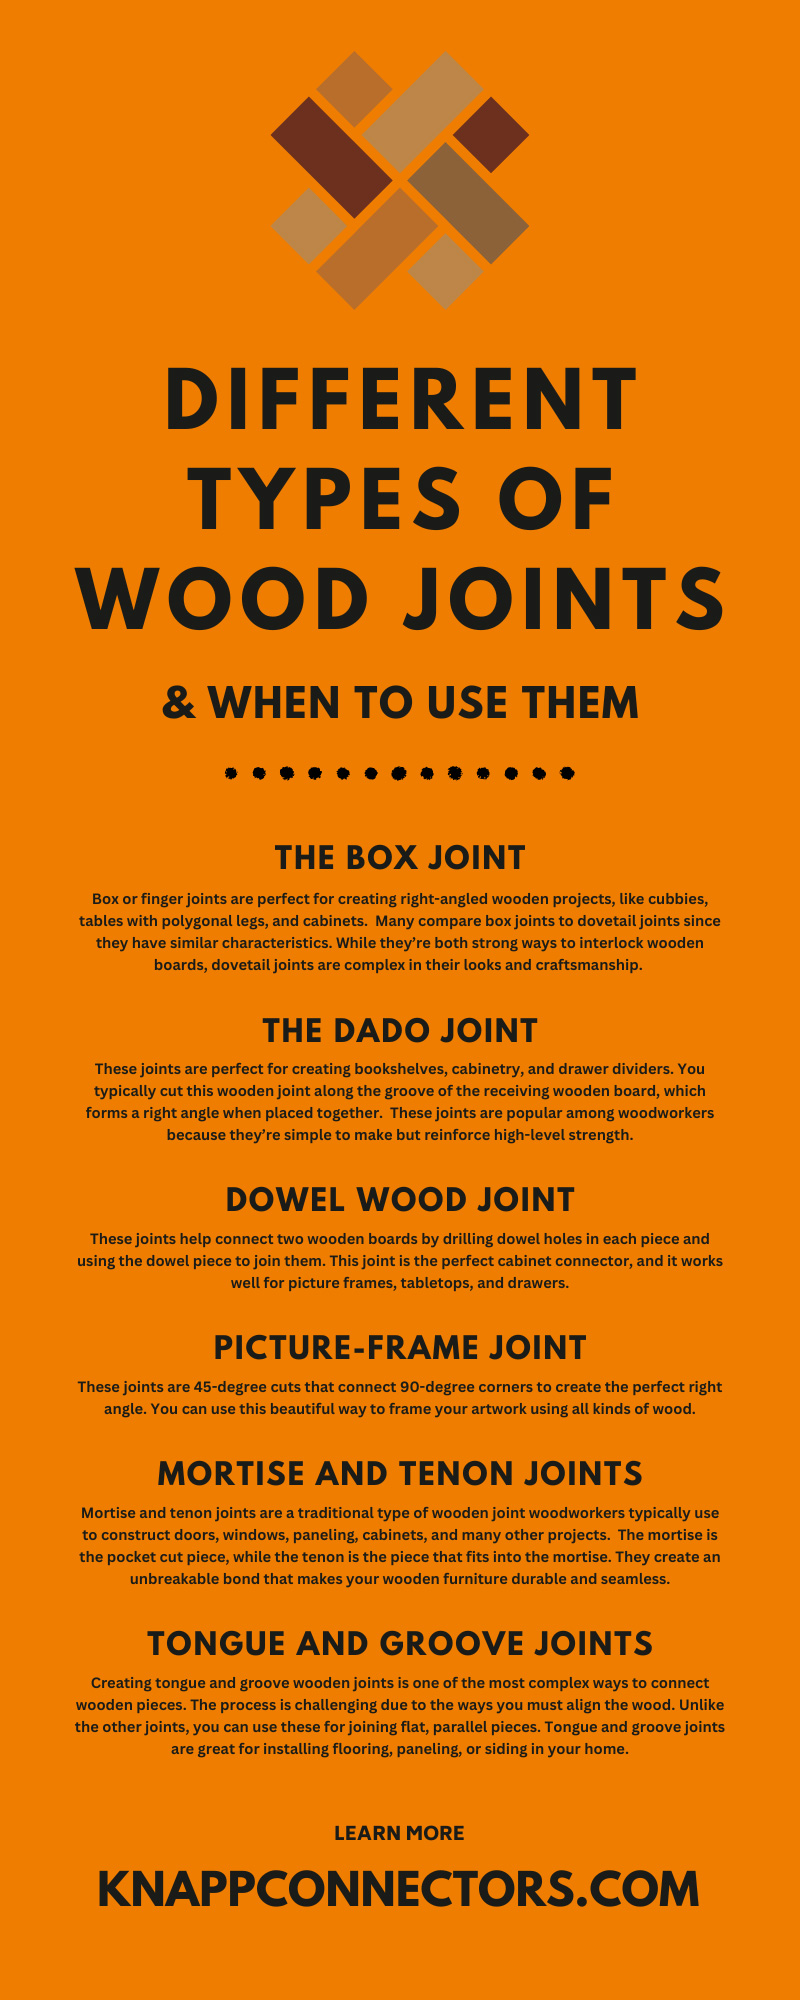 Different Types of Wood Joints & When To Use Them